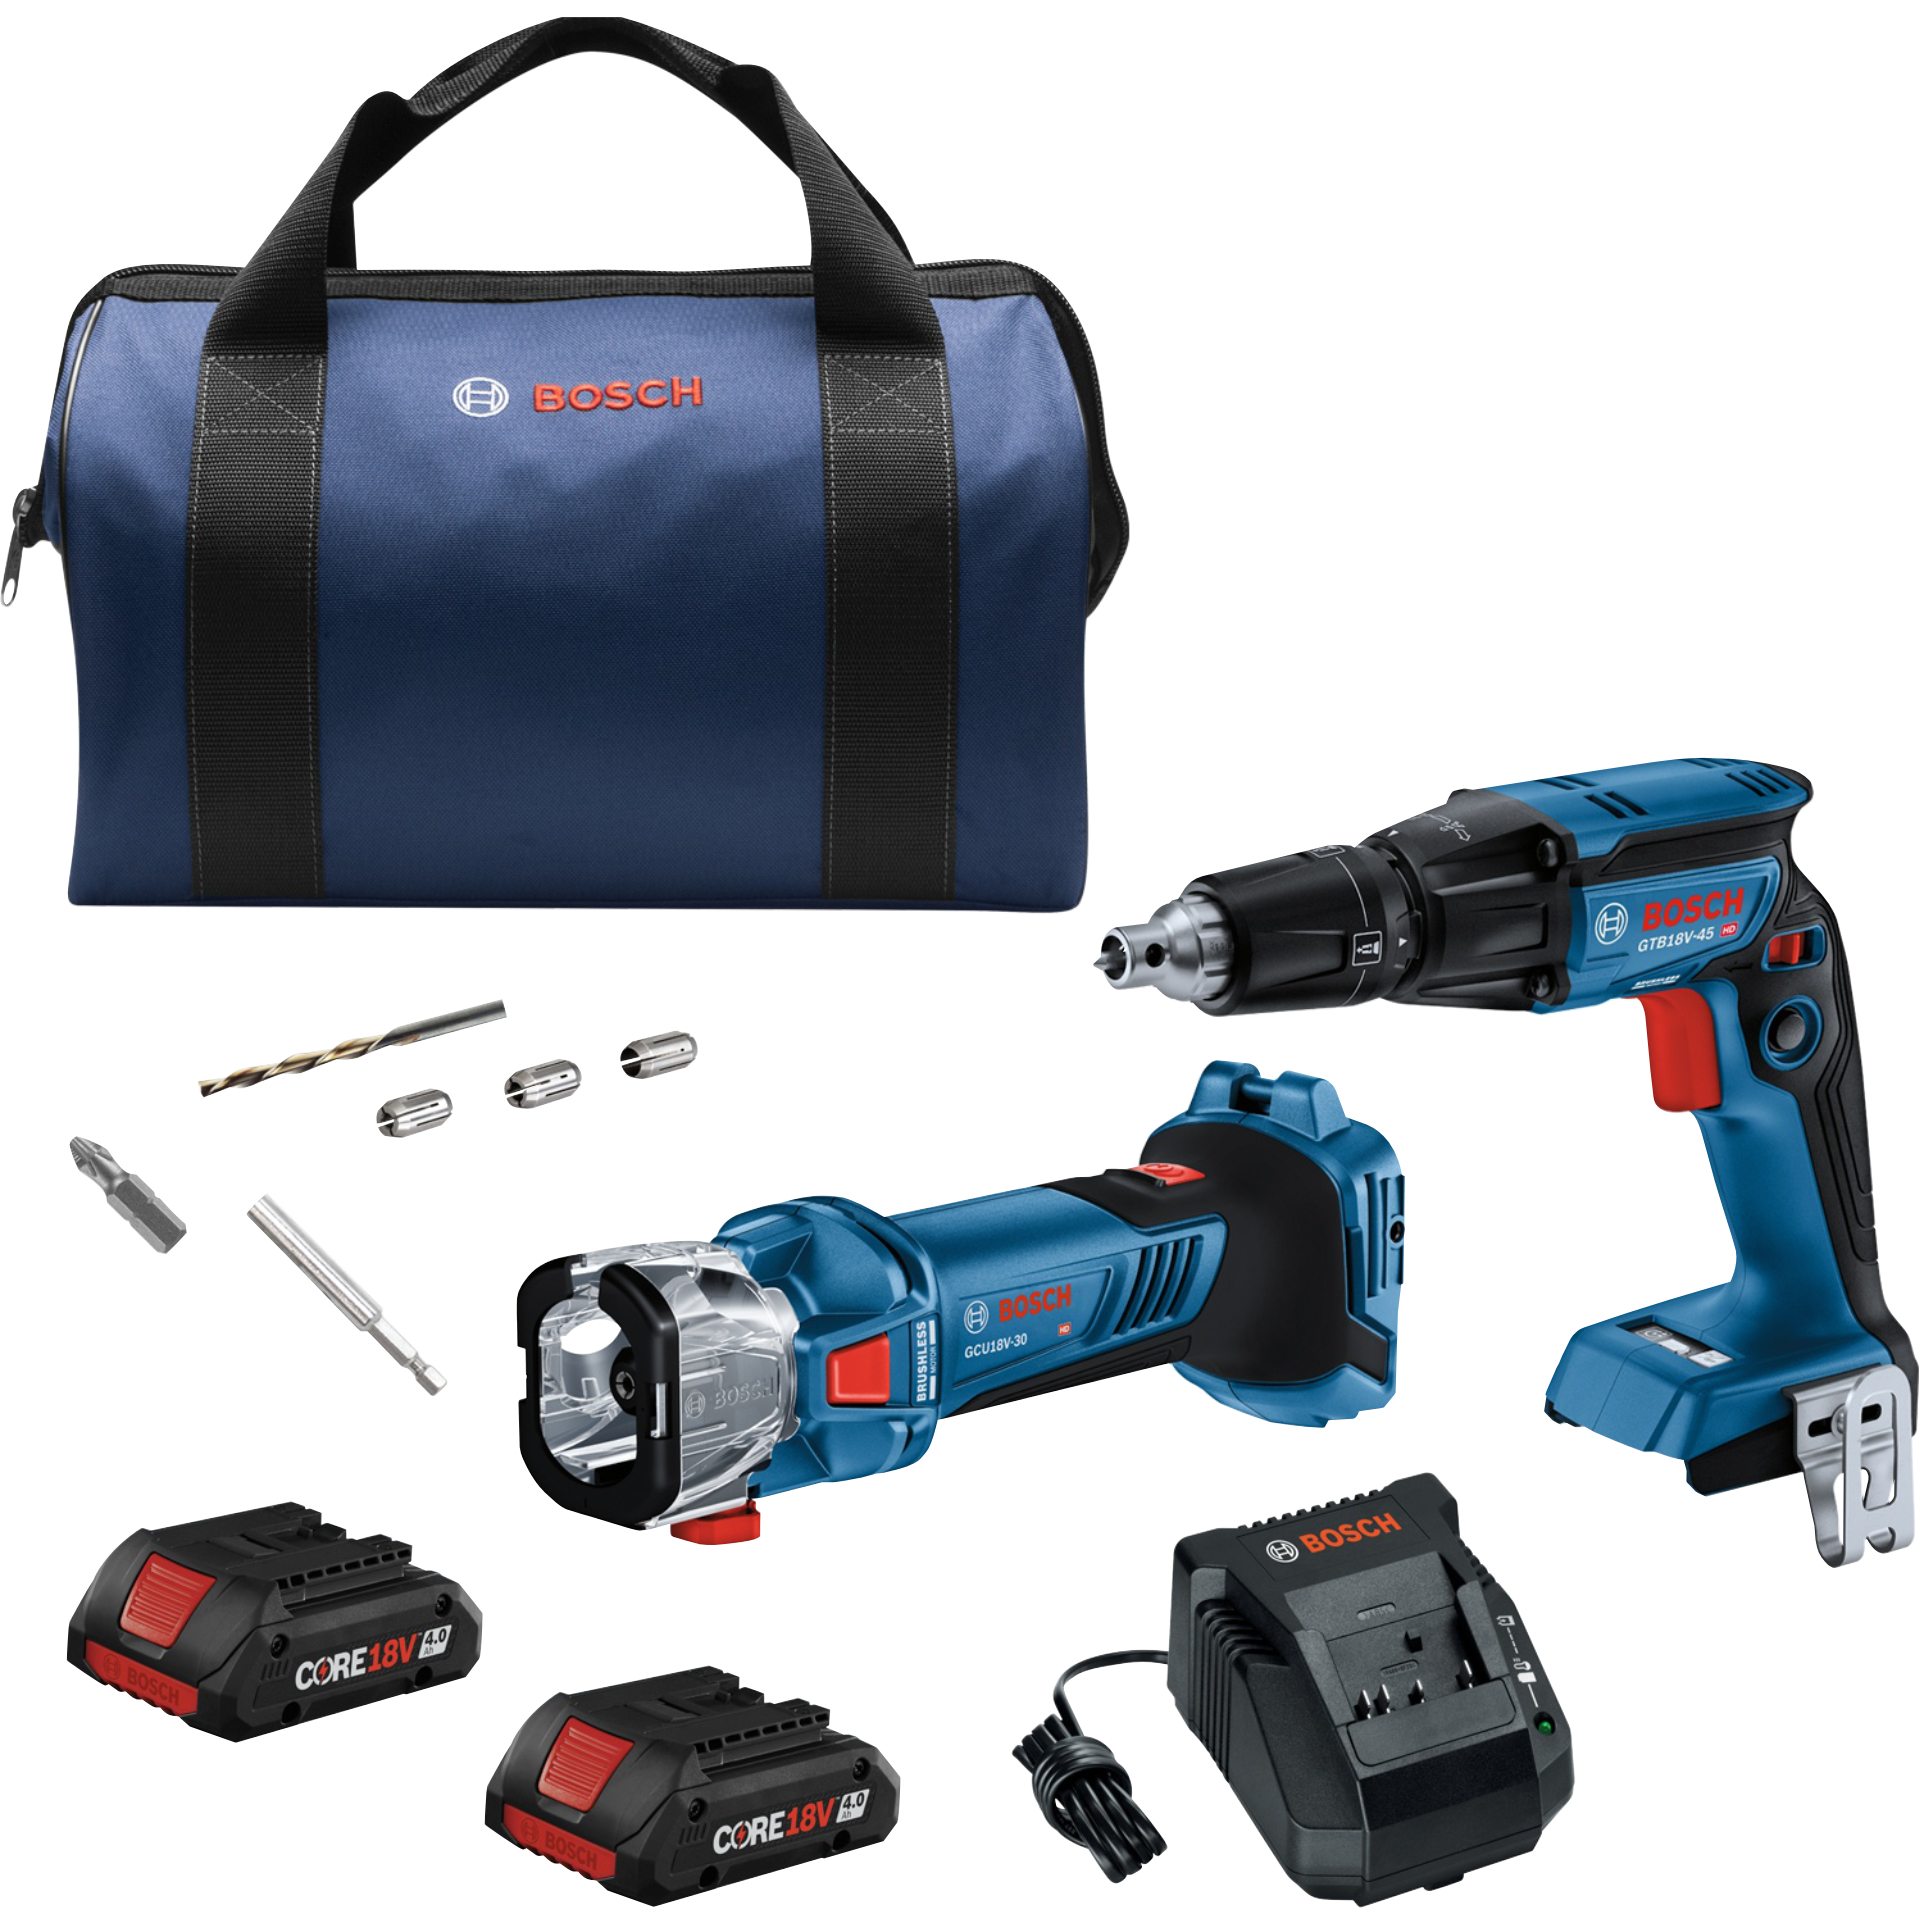 18V Brushless Screwgun and Cut-Out Tool Kit